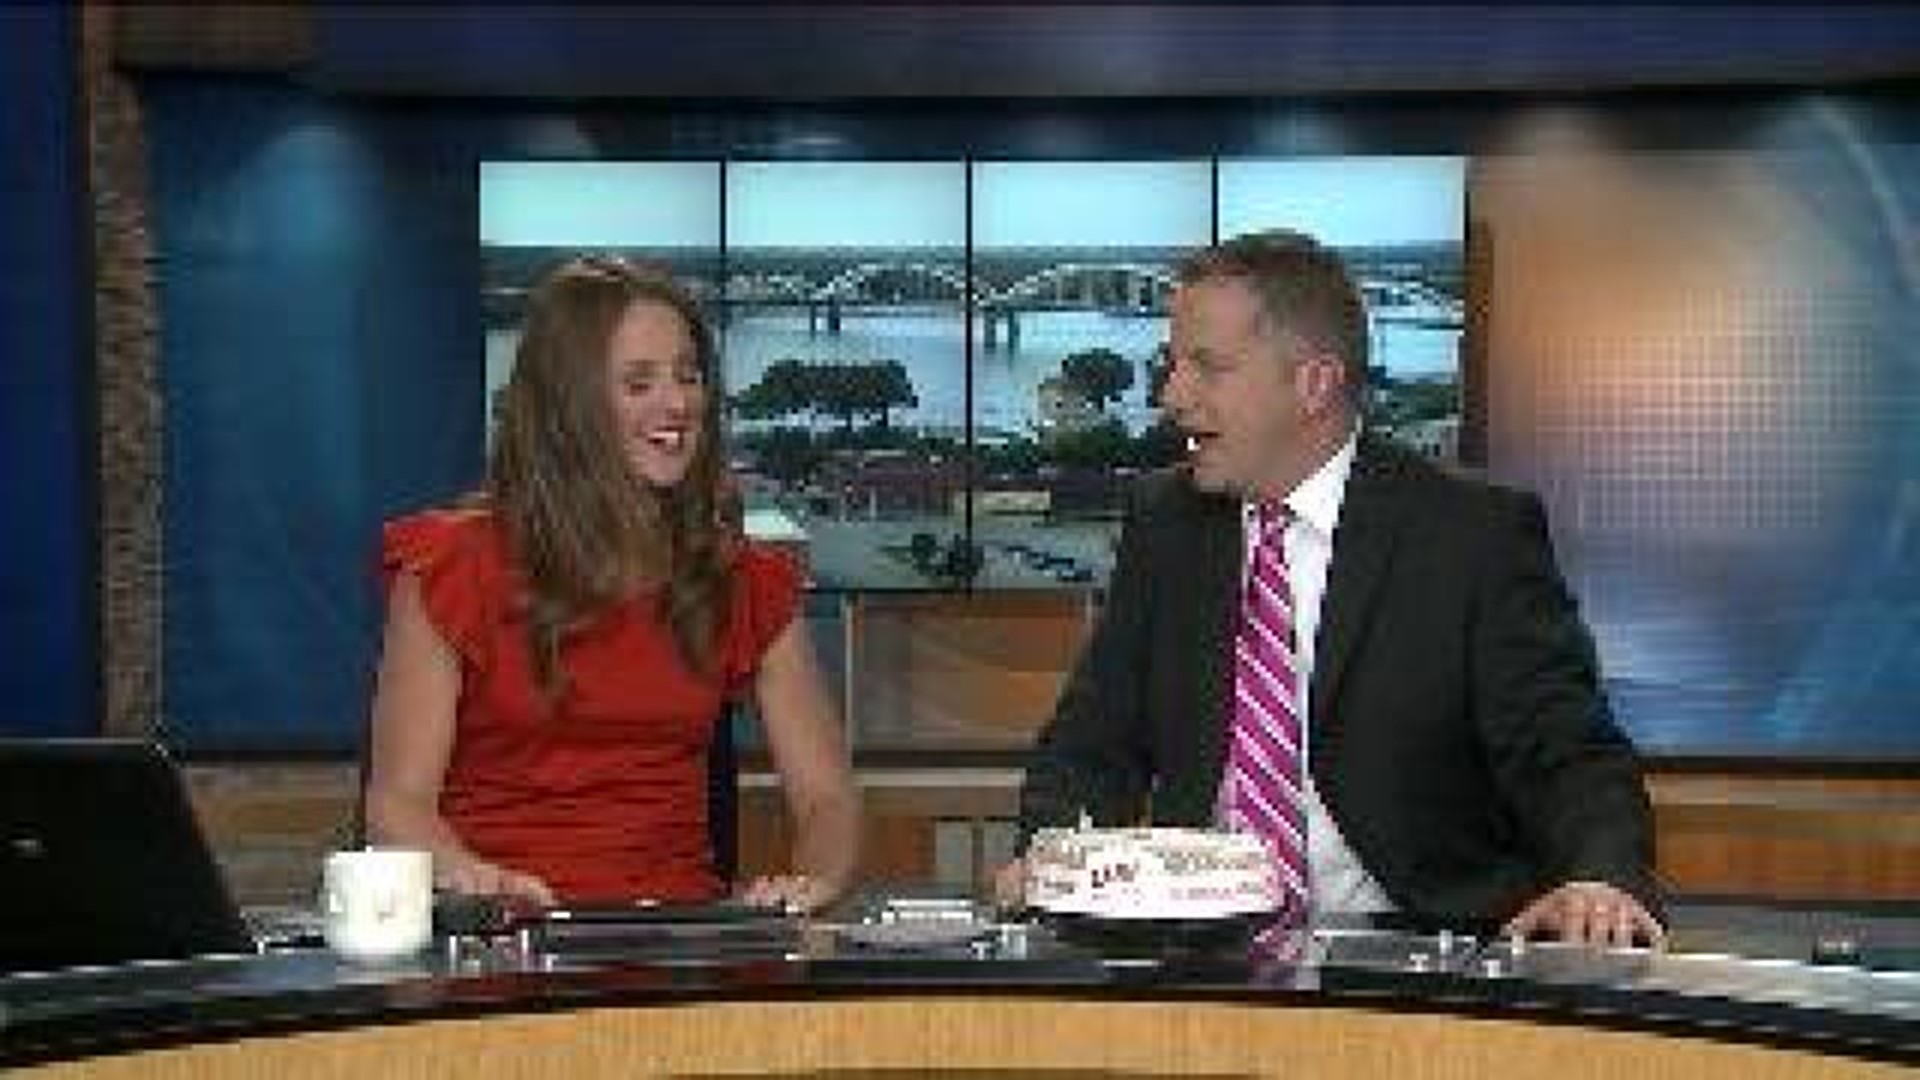 Celebrating the arrival of our new meteorologist